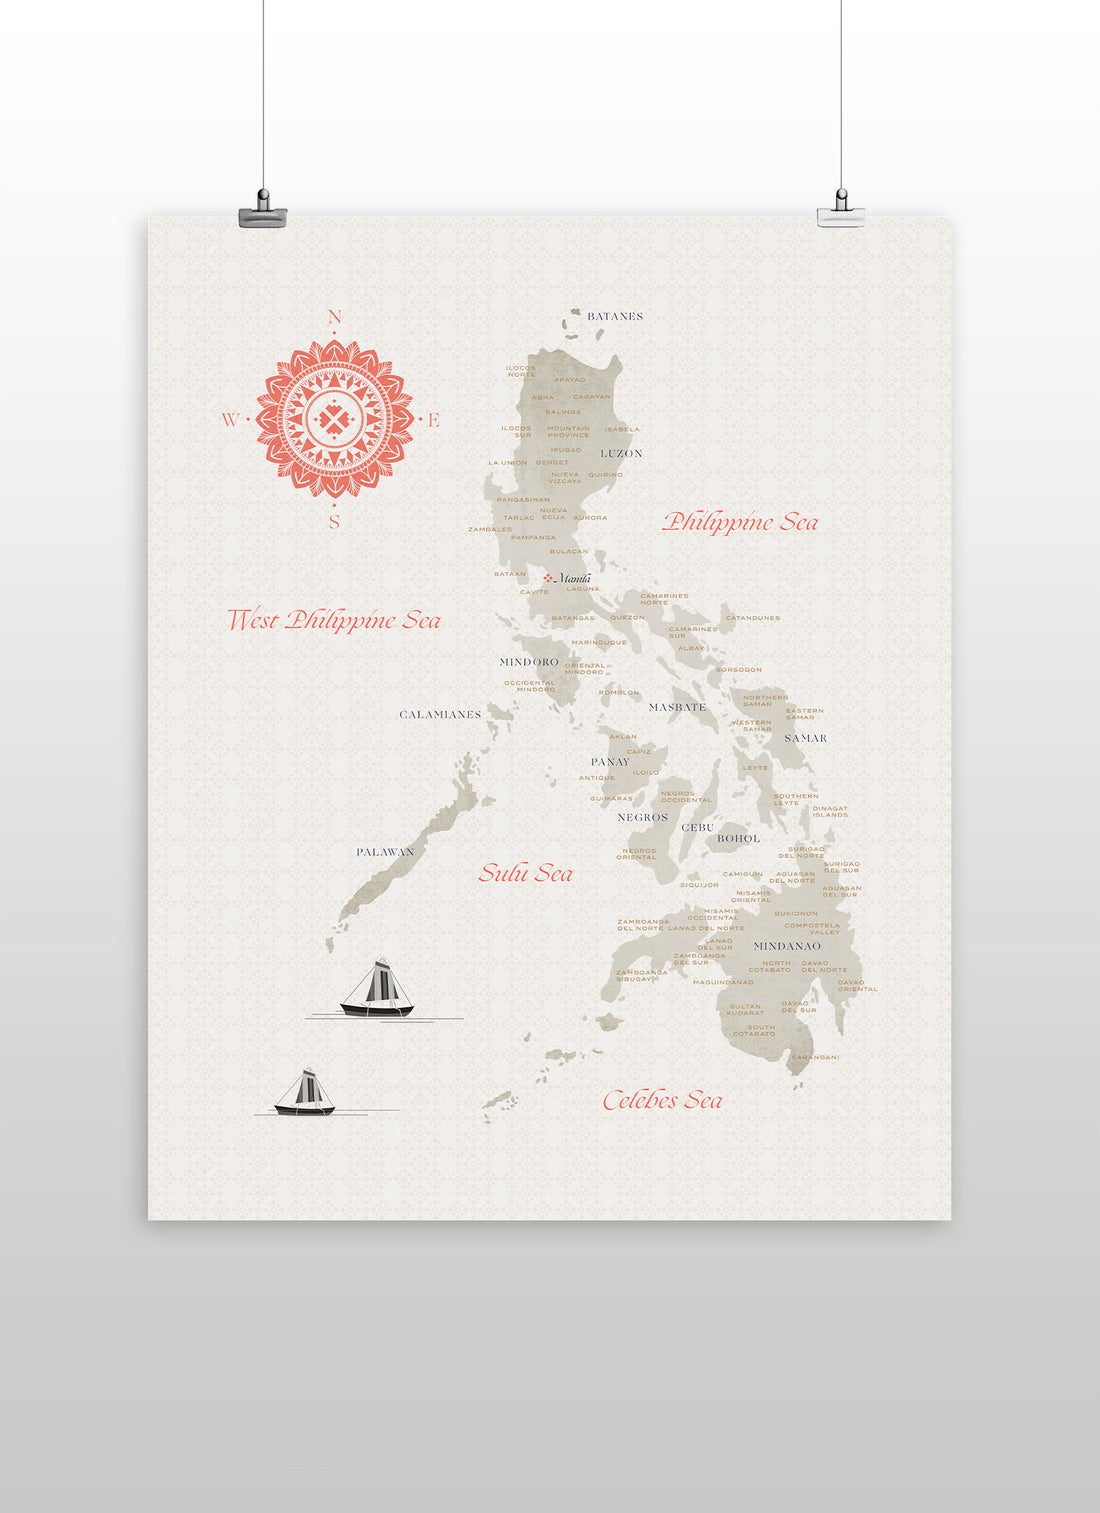 CMANGO Design Map of the Philippines, Coral, 16" x 20"